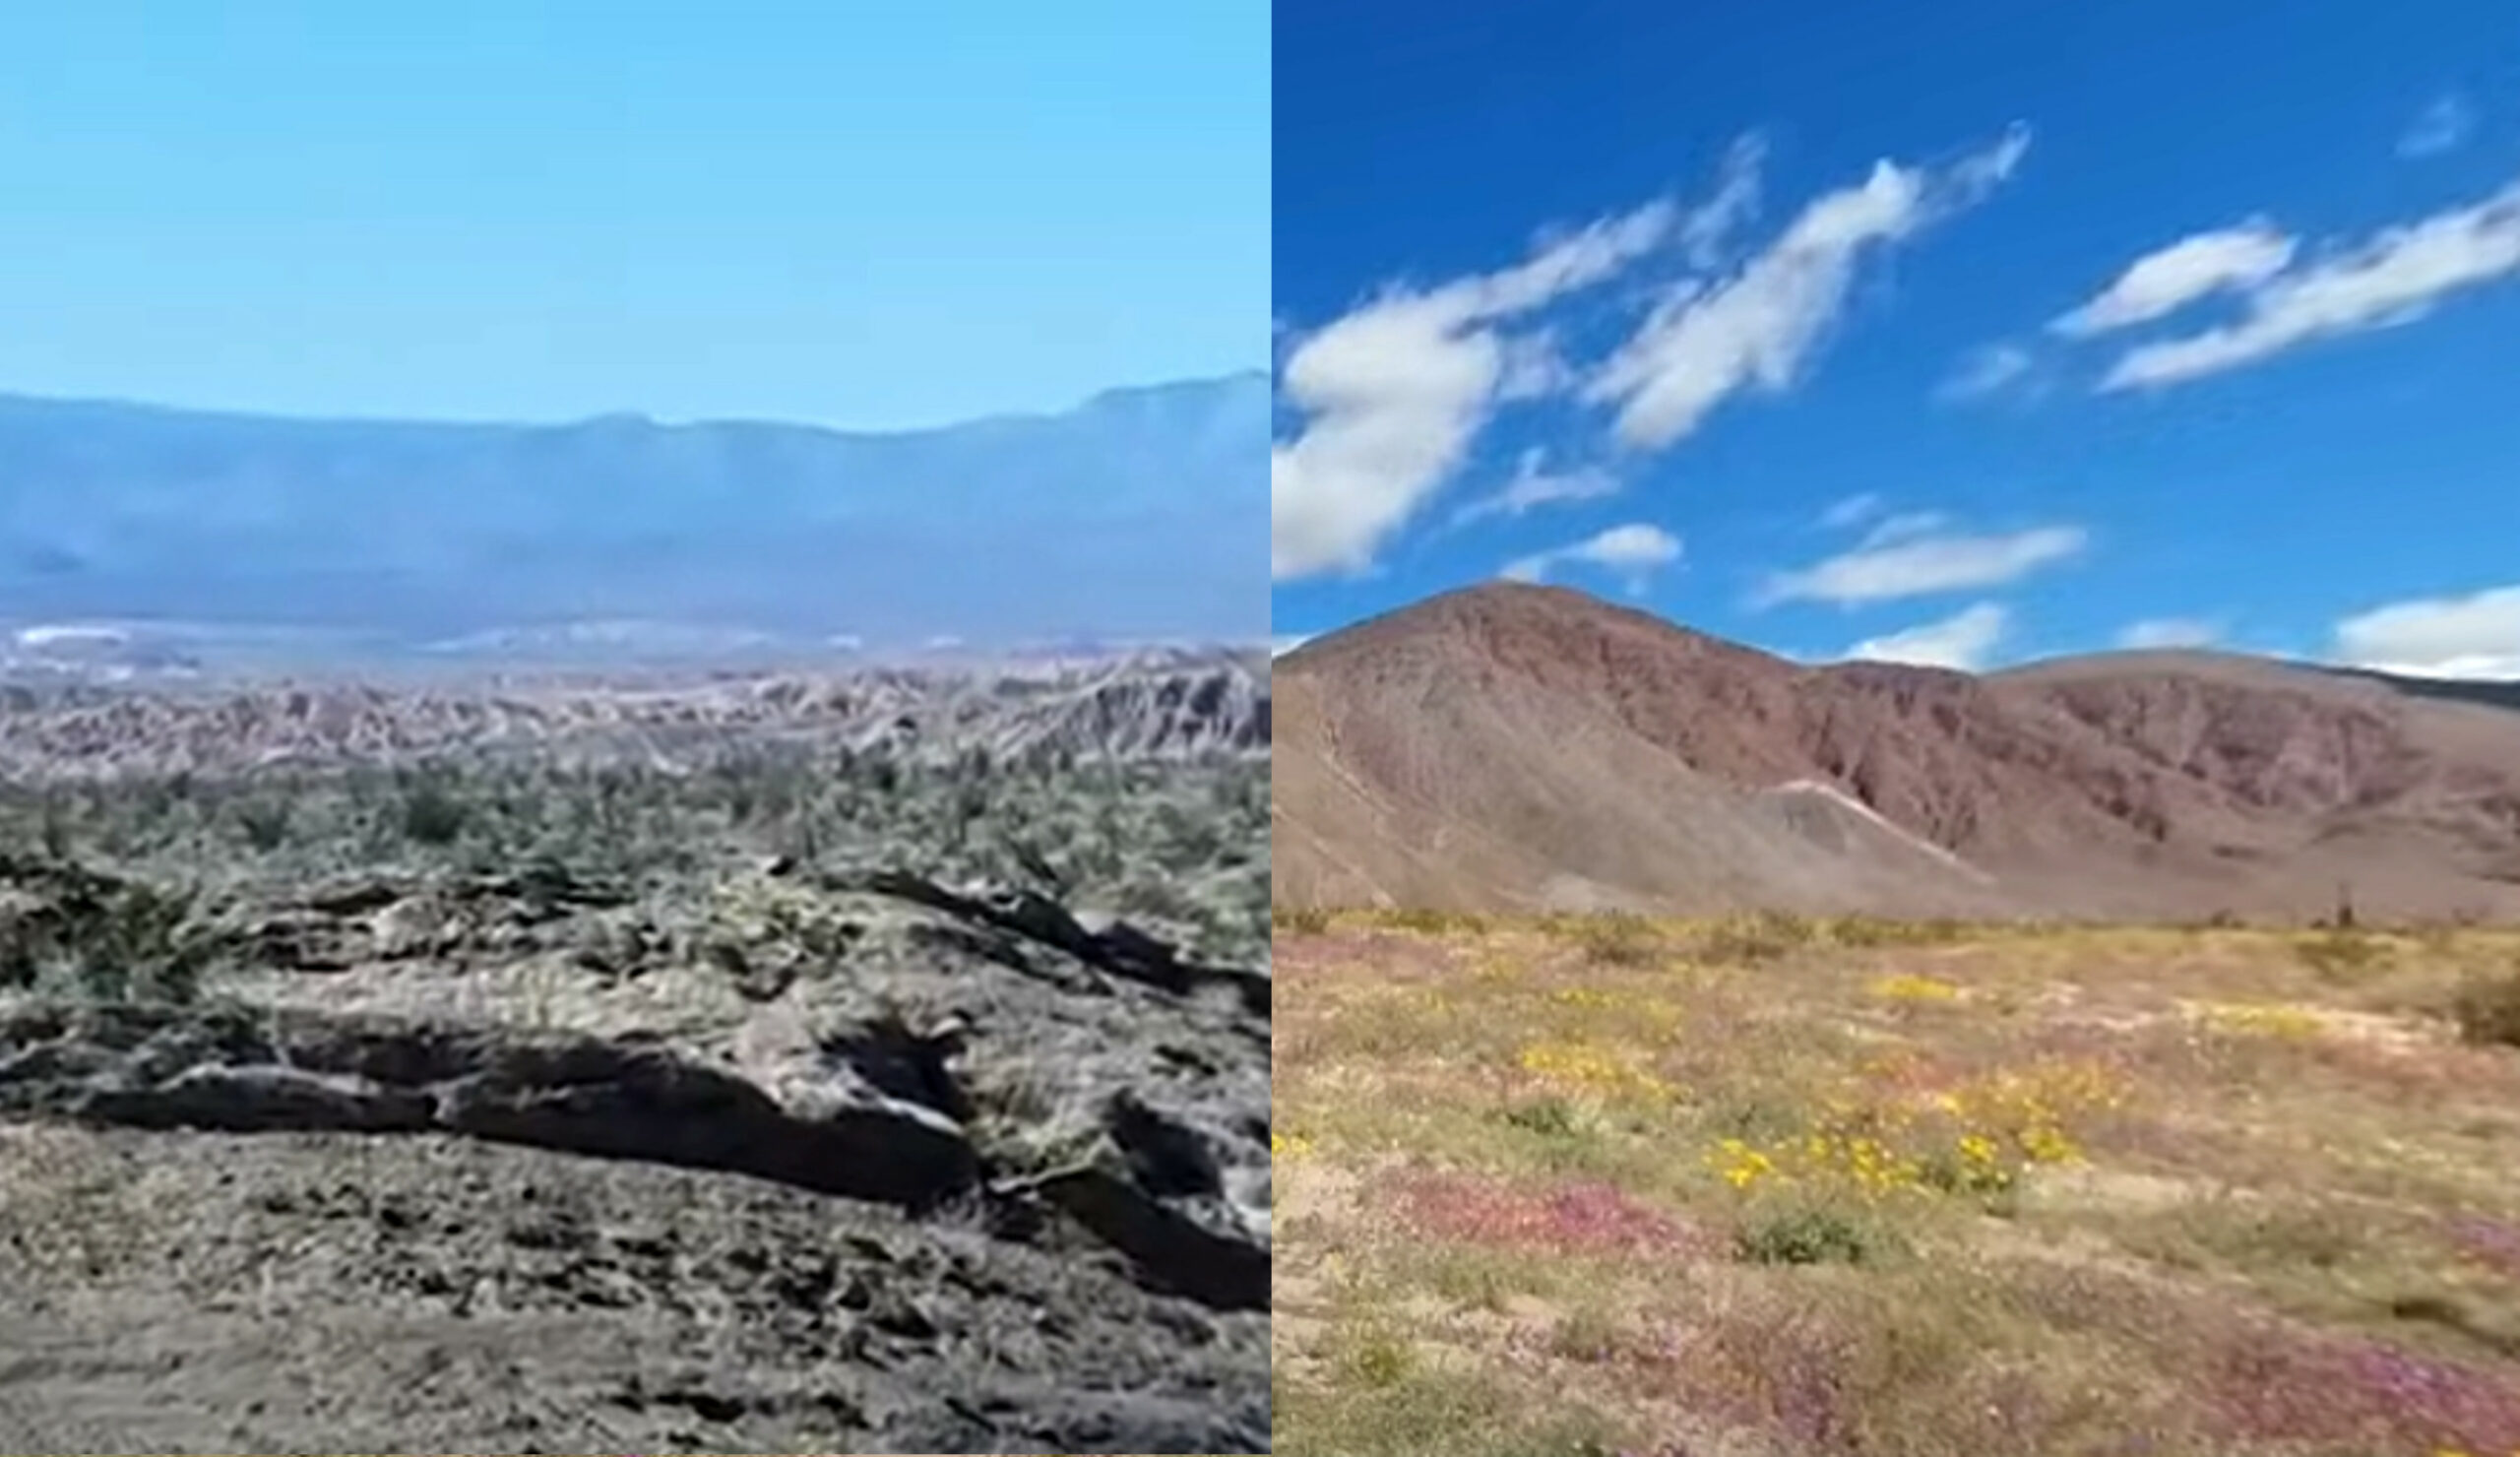 Anza Borrego Desert State Park Before and After a Superbloom in 2019.